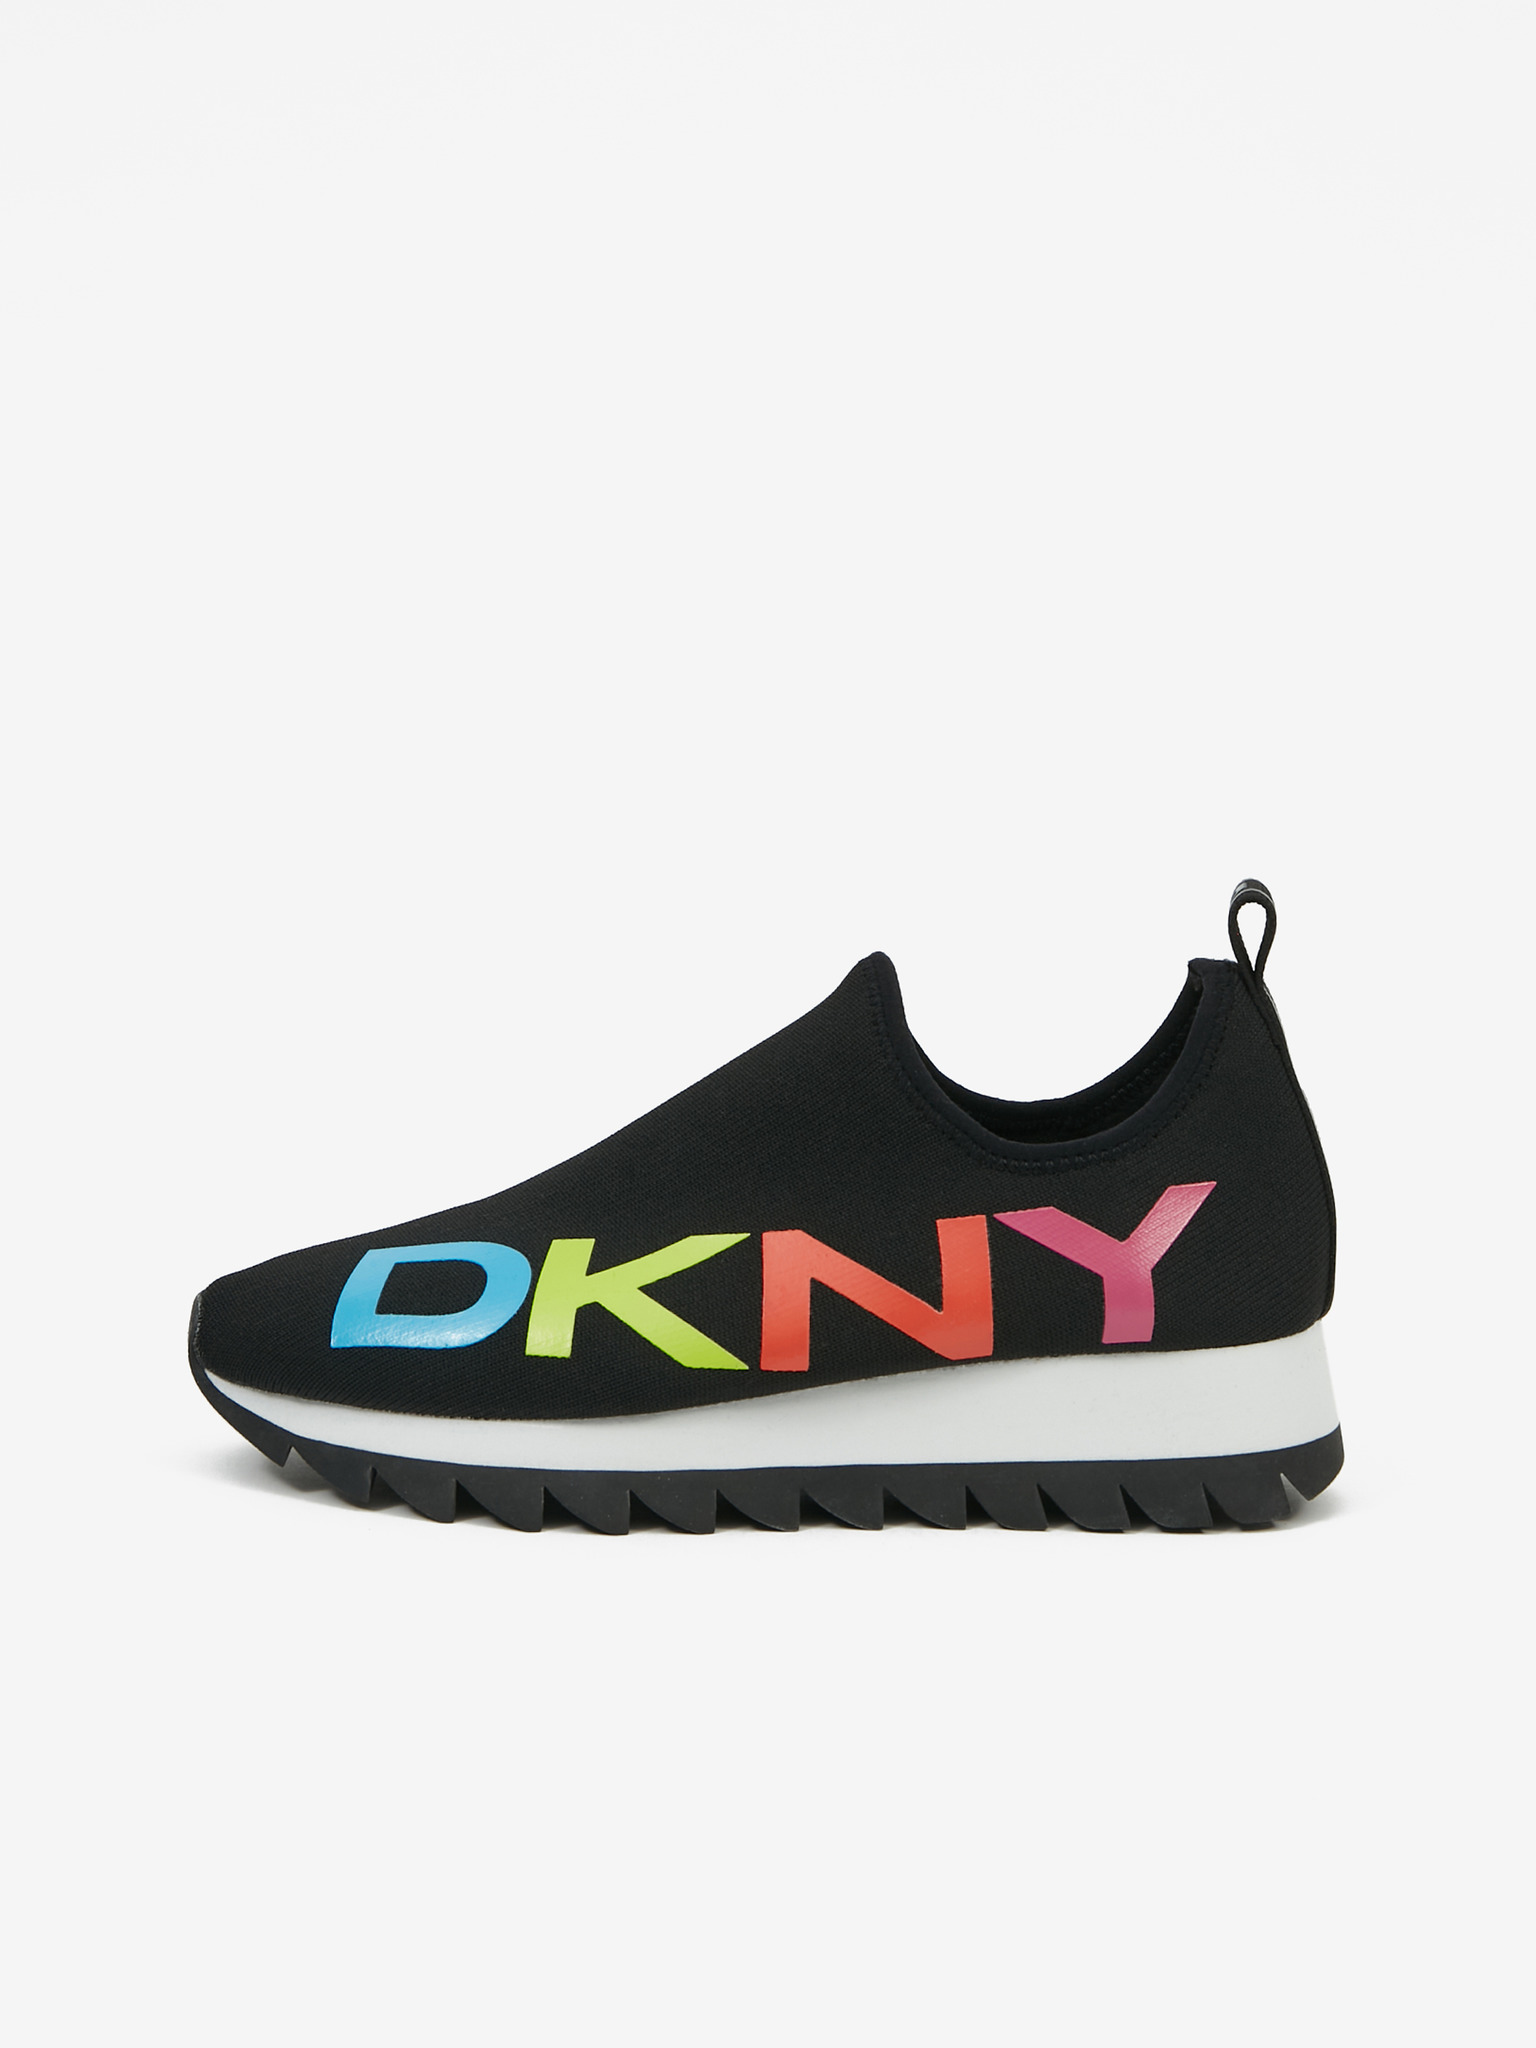 DKNY Shoes Size UK 6/39 For Ladies - Đức An Phát